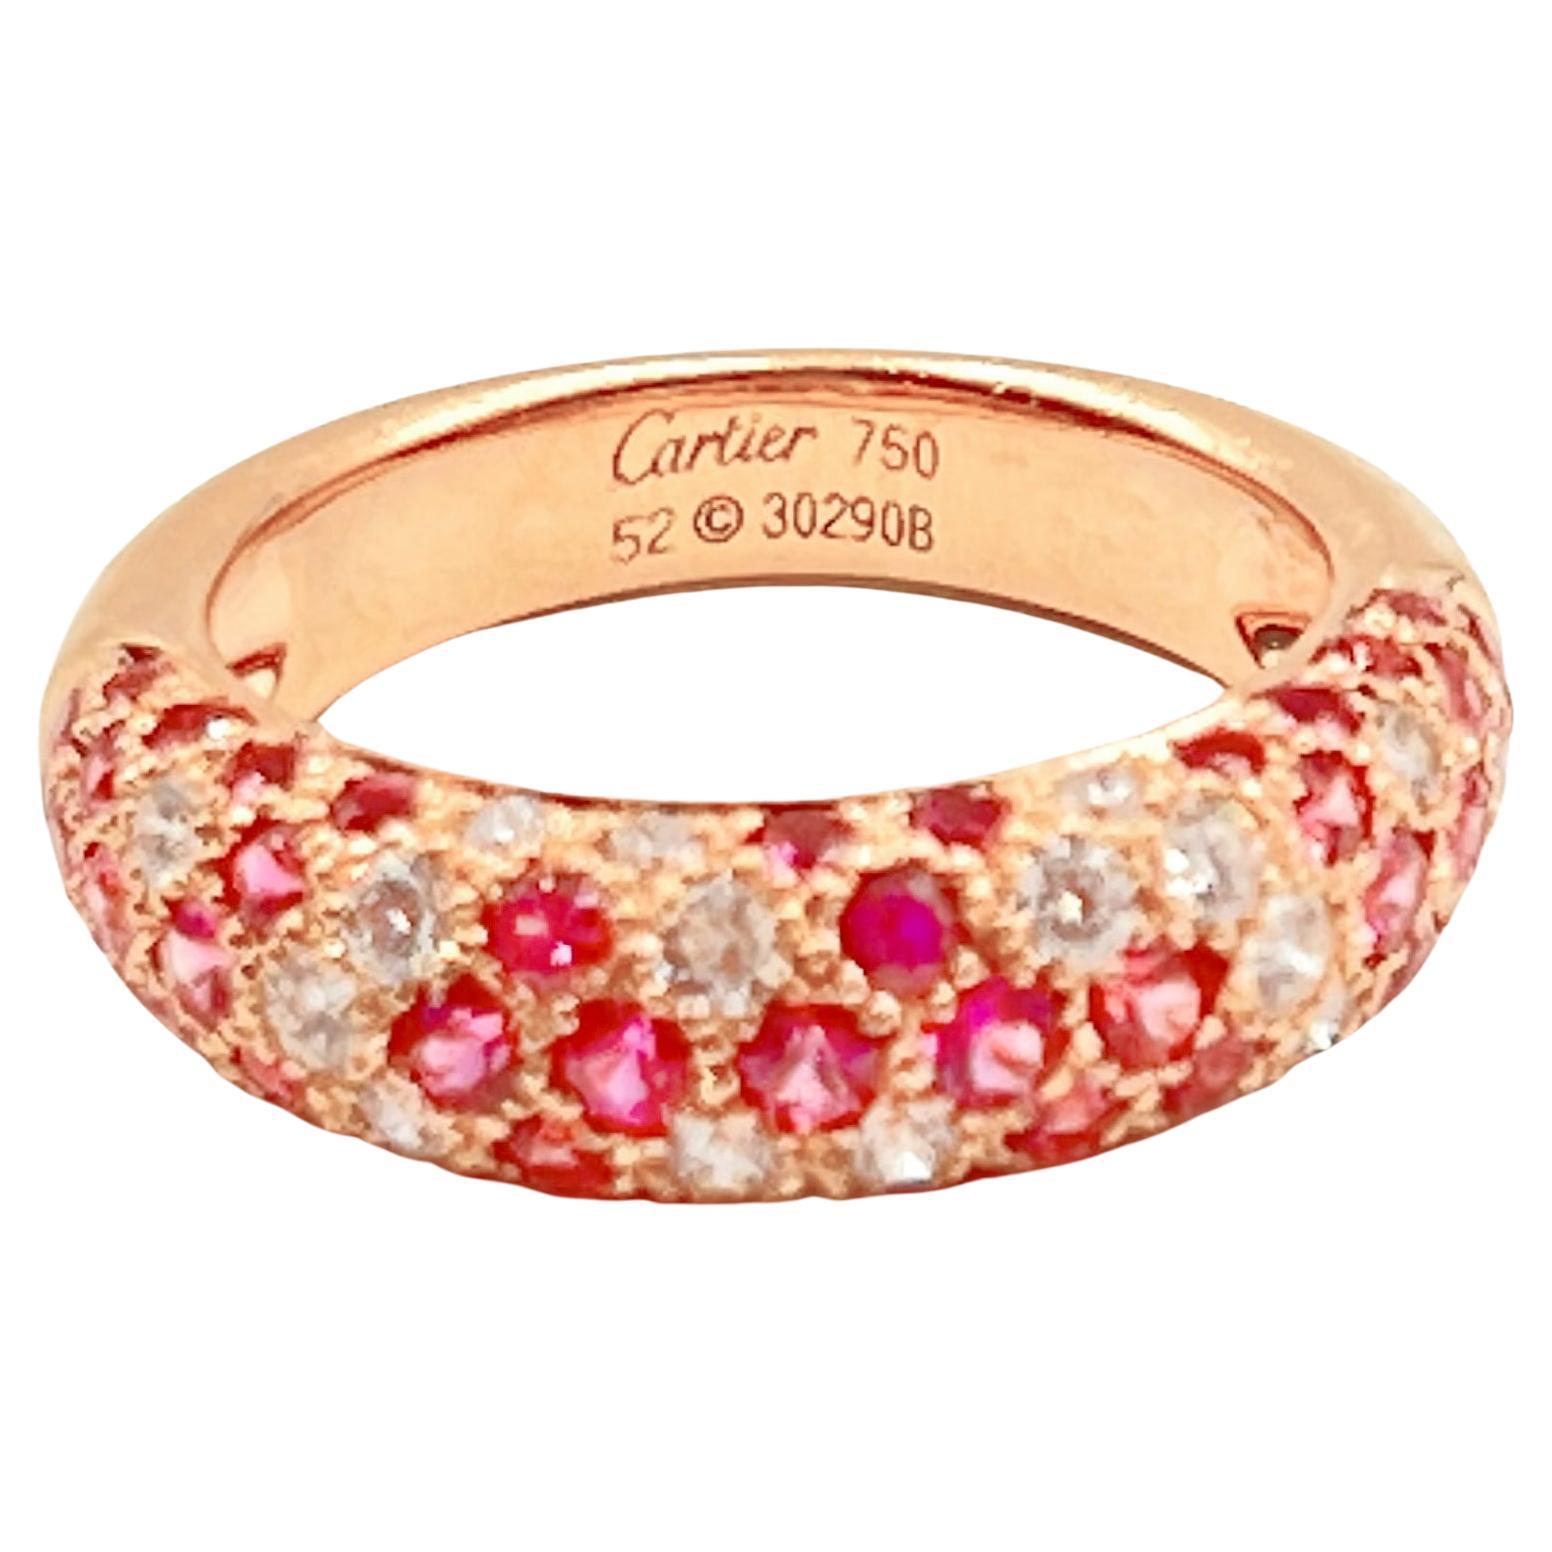 An 18k rose gold, pink sapphire and diamond domed ring by Cartier from the Etincelle collection. Pave-set with fifty round faceted pink sapphires and nineteen round brilliant-cut diamonds halfway around the band.  The diamonds have an approximate